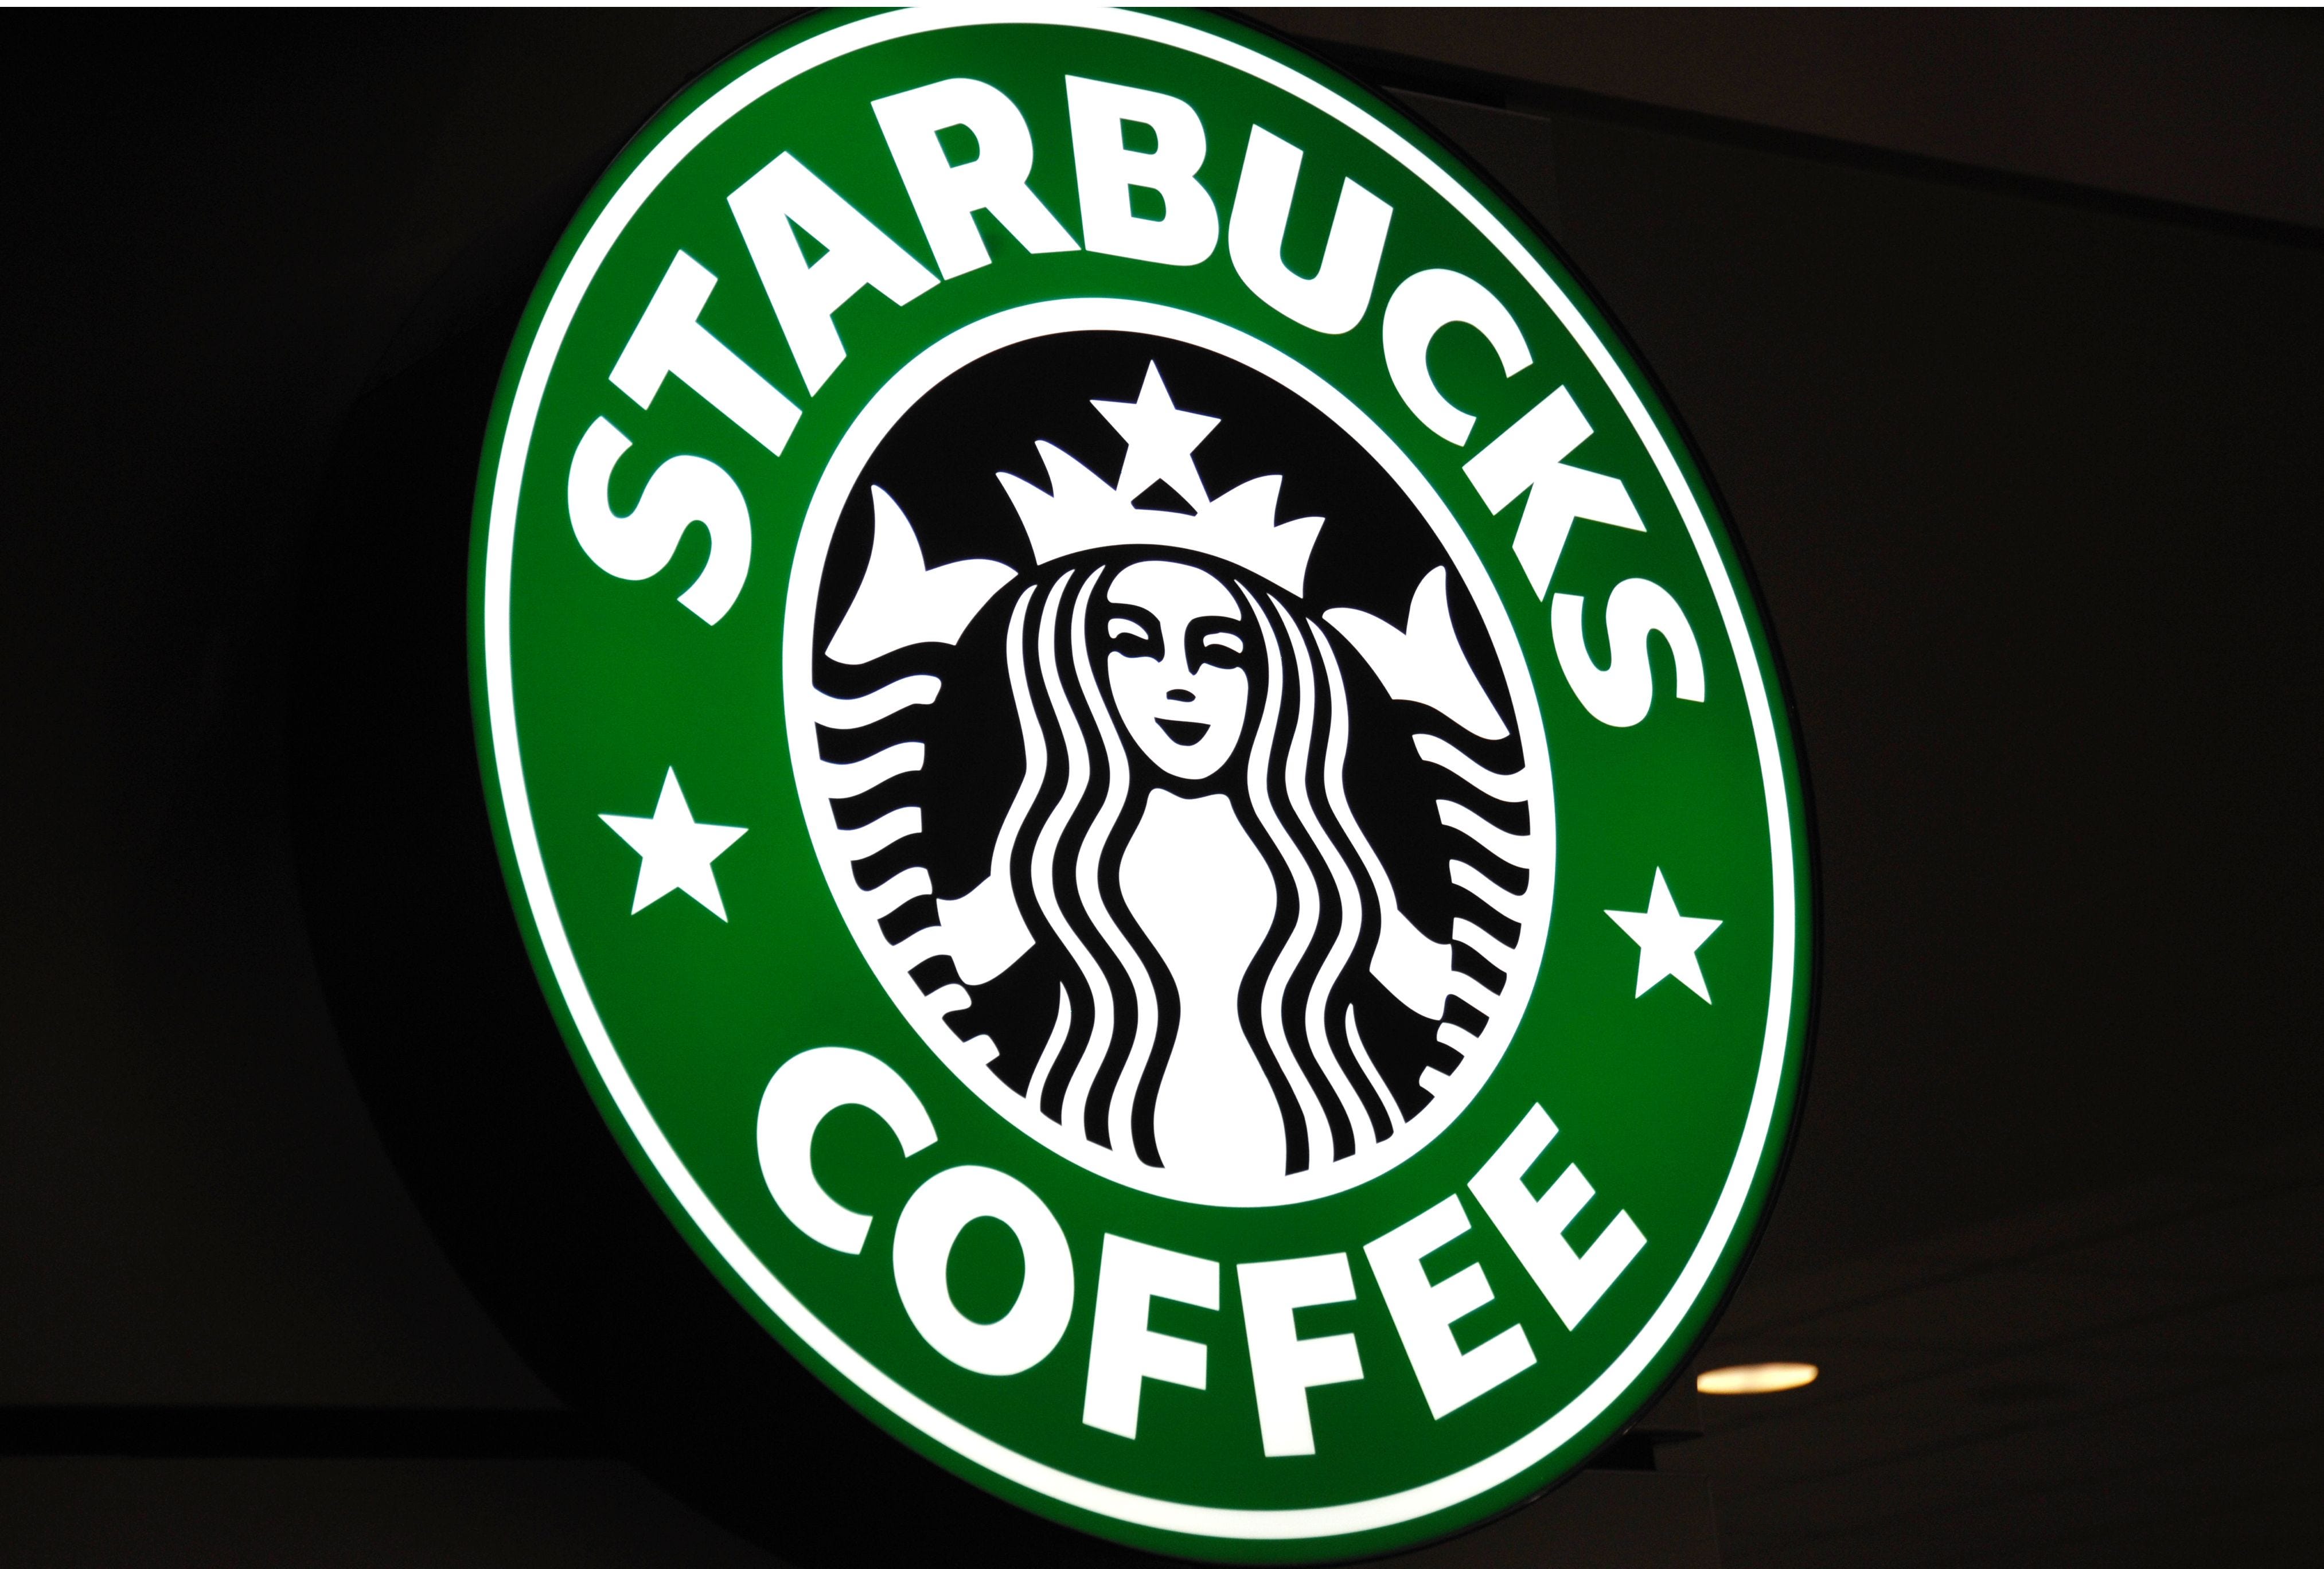 Starbucks Lawsuit over ice in chilled coffee, tea is 'frivolous